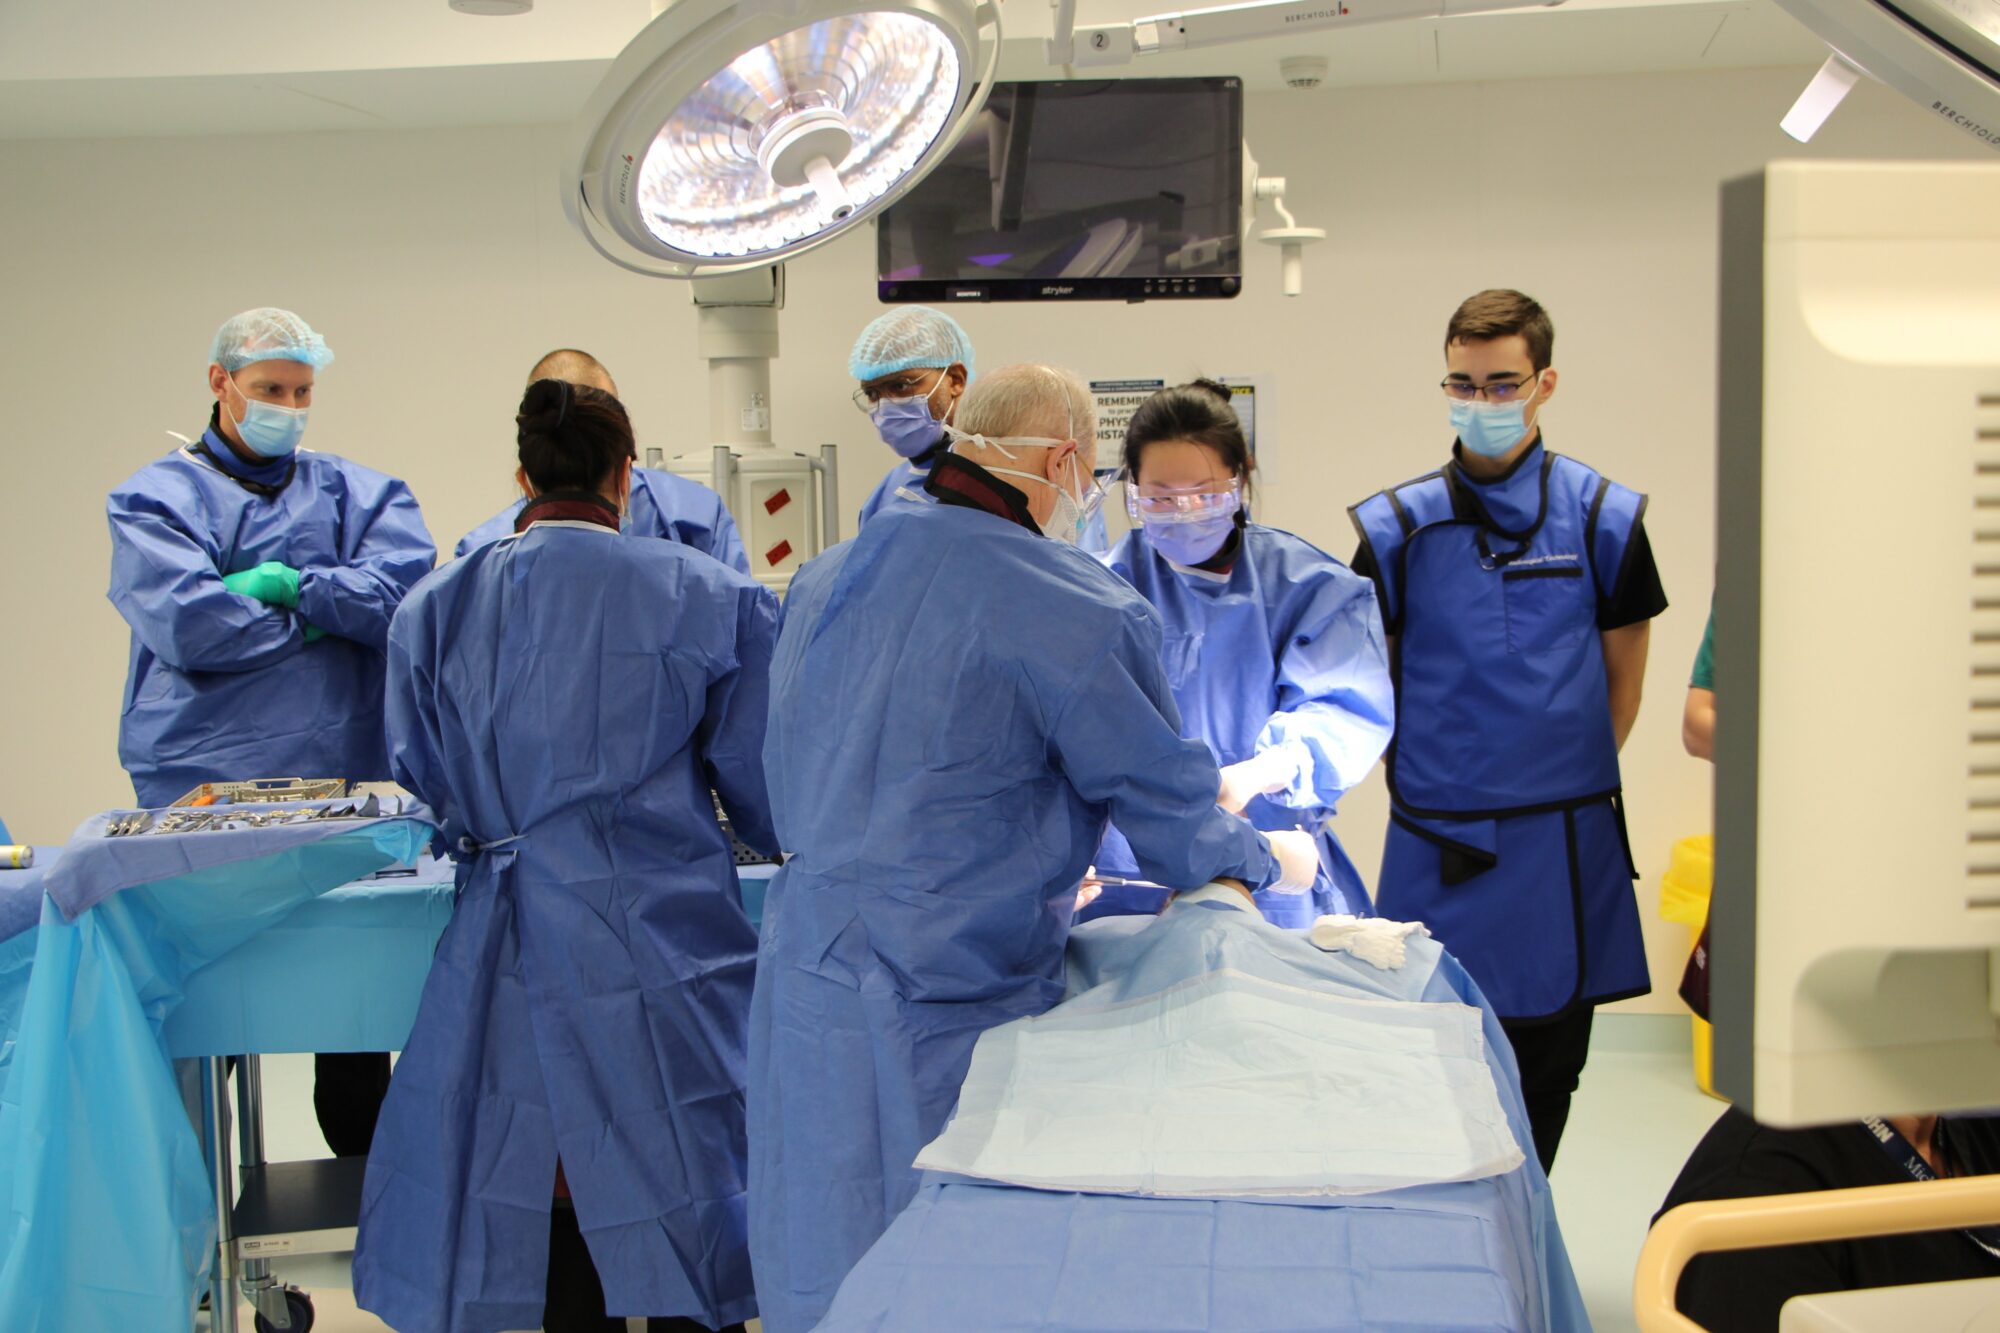 As part of their orthopedic ankle surgery course, Smith + Nephew (S&N) required X-ray imaging be taken throughout the procedure to check on the placement of the implant. (L to R), Mark Hynes, S&N, Giselle Magtoto, St. Joseph’s Health Centre, Larry Stawinski, S&N, Dwaine Jones, S&N, Dr. Harold Braden, St Joseph’​s Health Centre, Dr. Joyce Fu, St. Joseph’s Health Centre and Michener Institute radiological technology student Adam Magliozzi. (Photo: UHN)